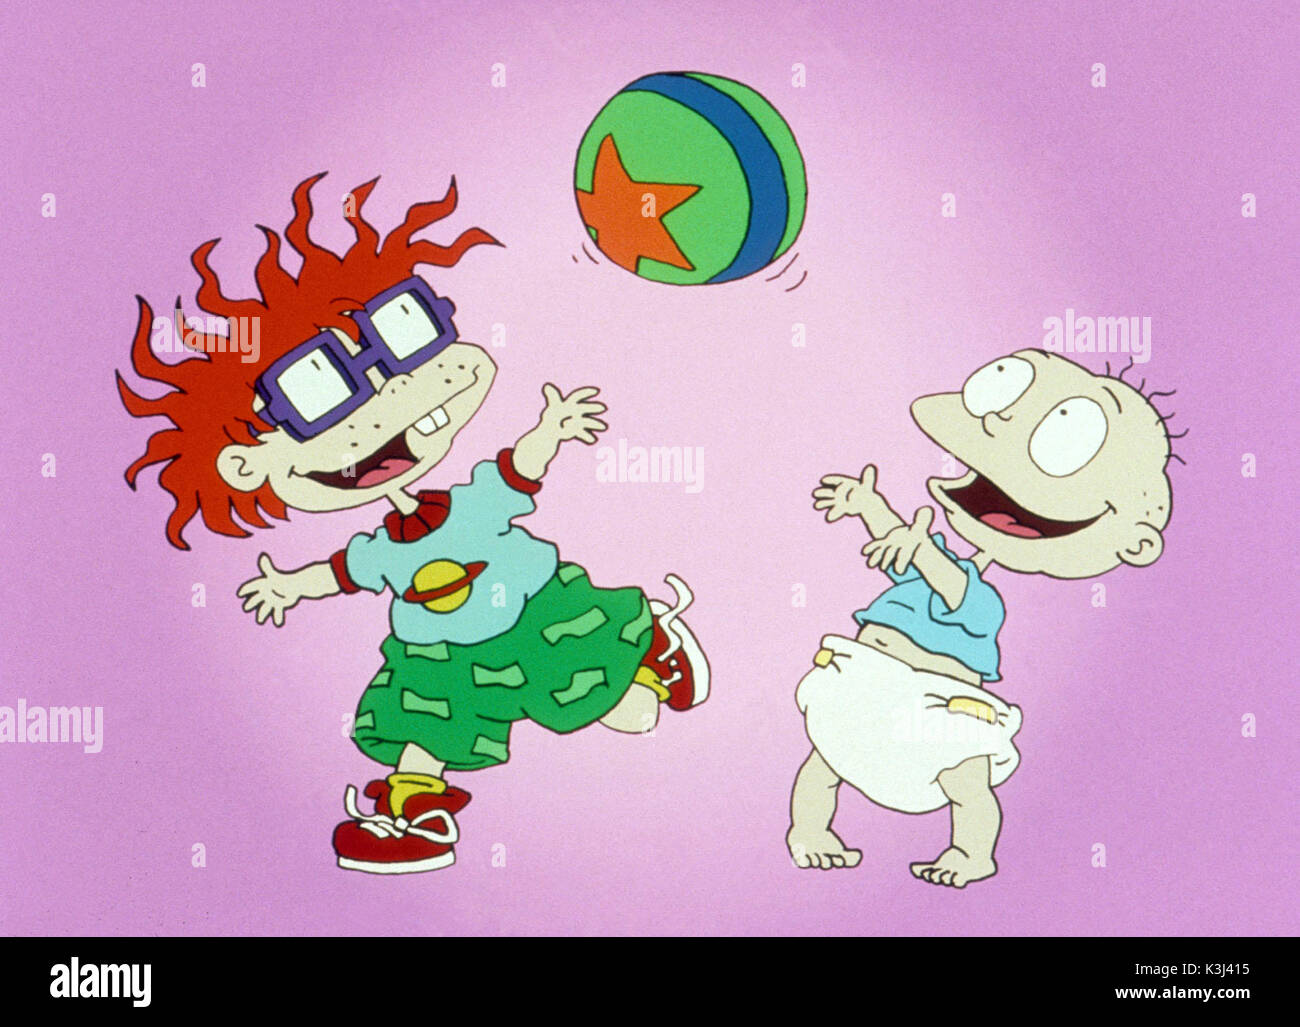 RUGRATS RUGRATS charatcers Chuckie Finster, Tommy Pickles Stock Photo